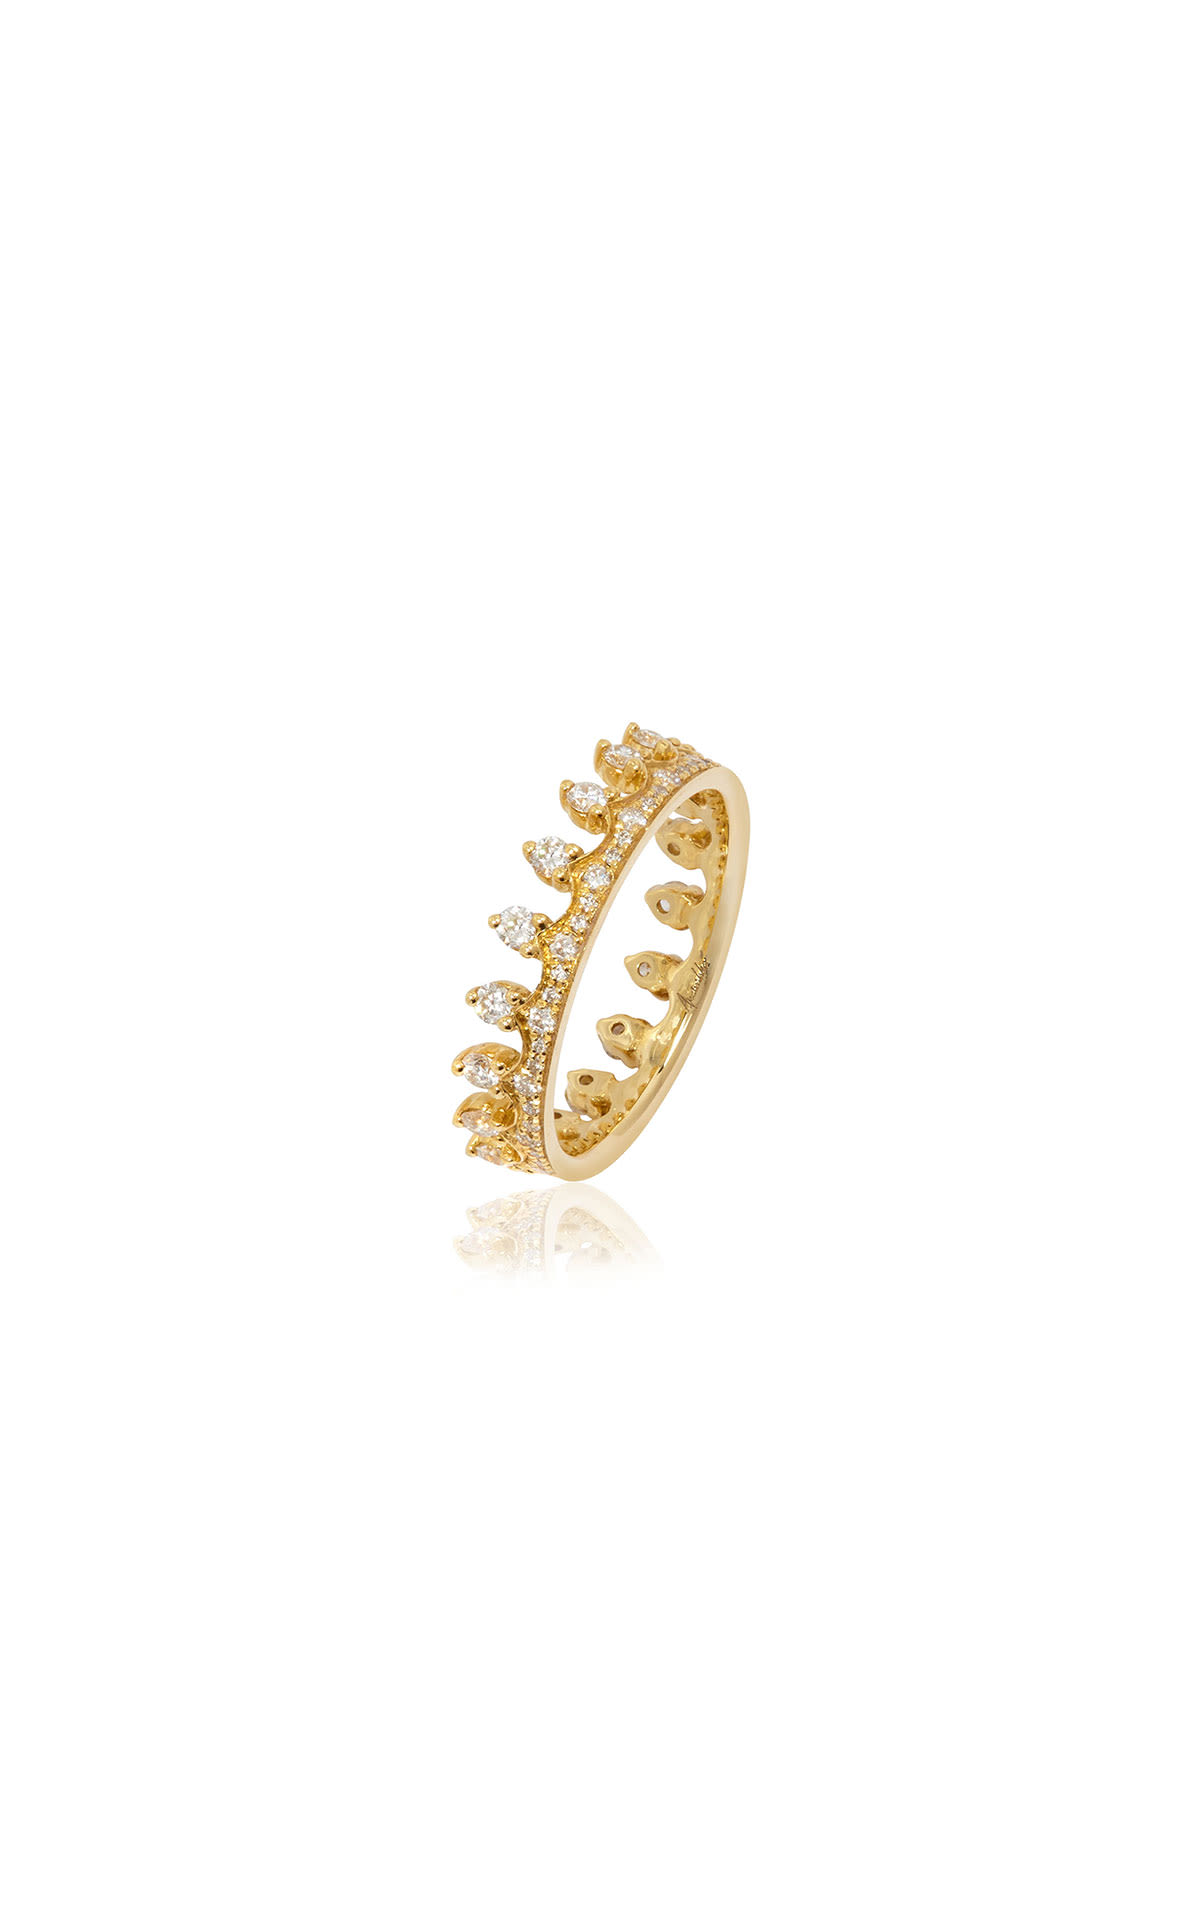 Annoushka Crown 18ct gold diamond ring from Bicester Village